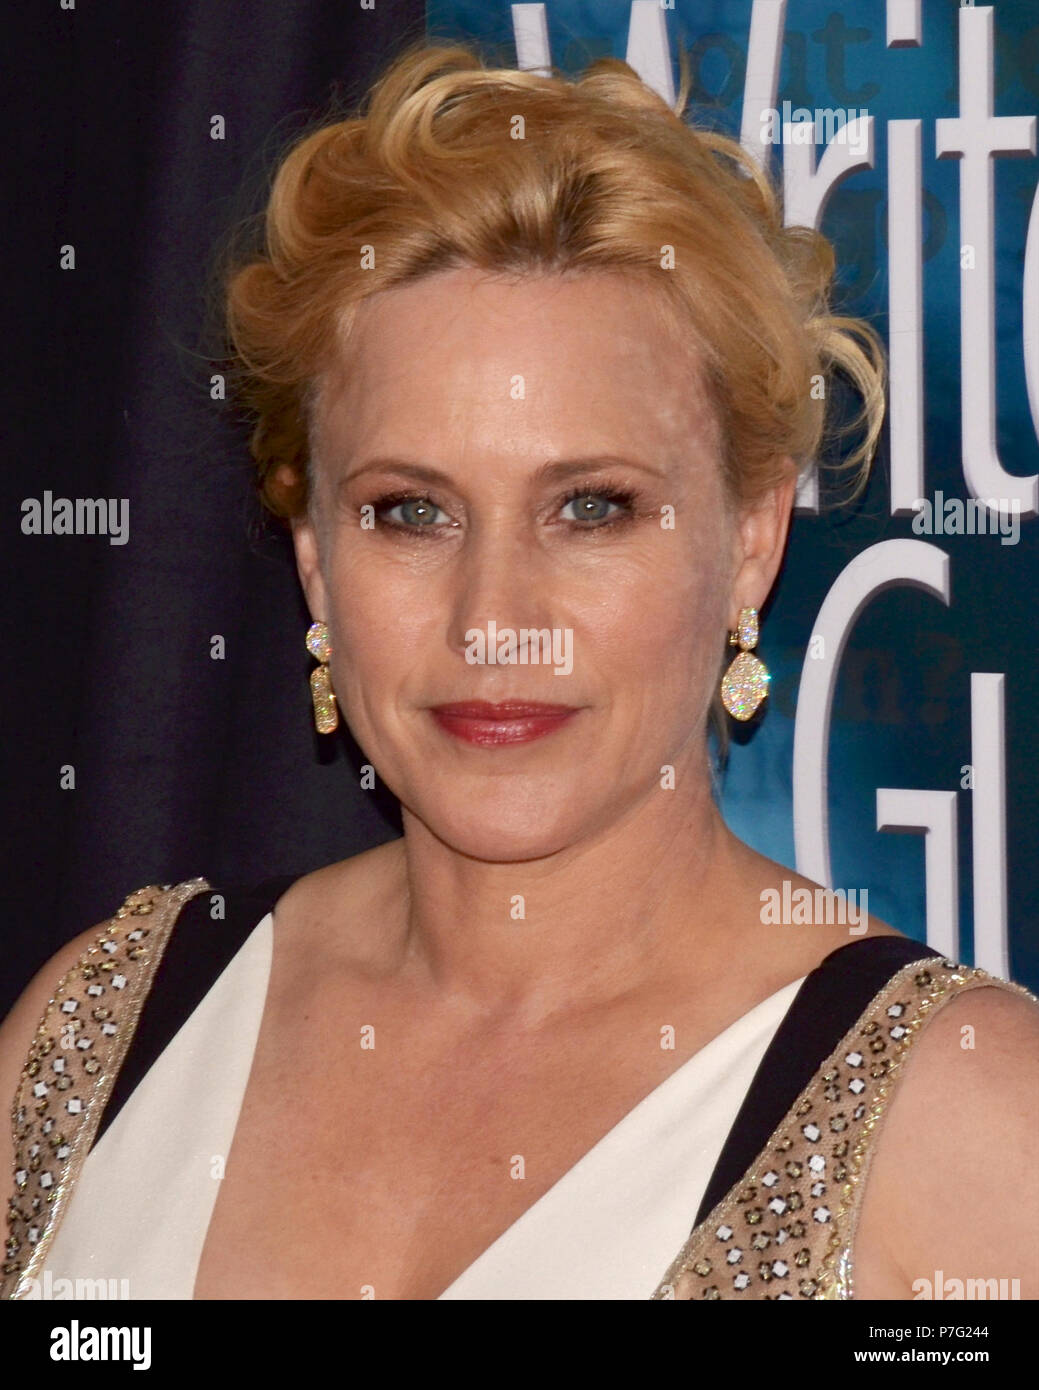 May 11, 2015 - Beverly Hills, California, USA - PATRICIA ARQUETTE attends at the 2015 Writers Guild Awards L.A. Ceremony at the Hyatt Regency Century Plaza. (Credit Image: © Billy Bennight via ZUMA Wire) Stock Photo